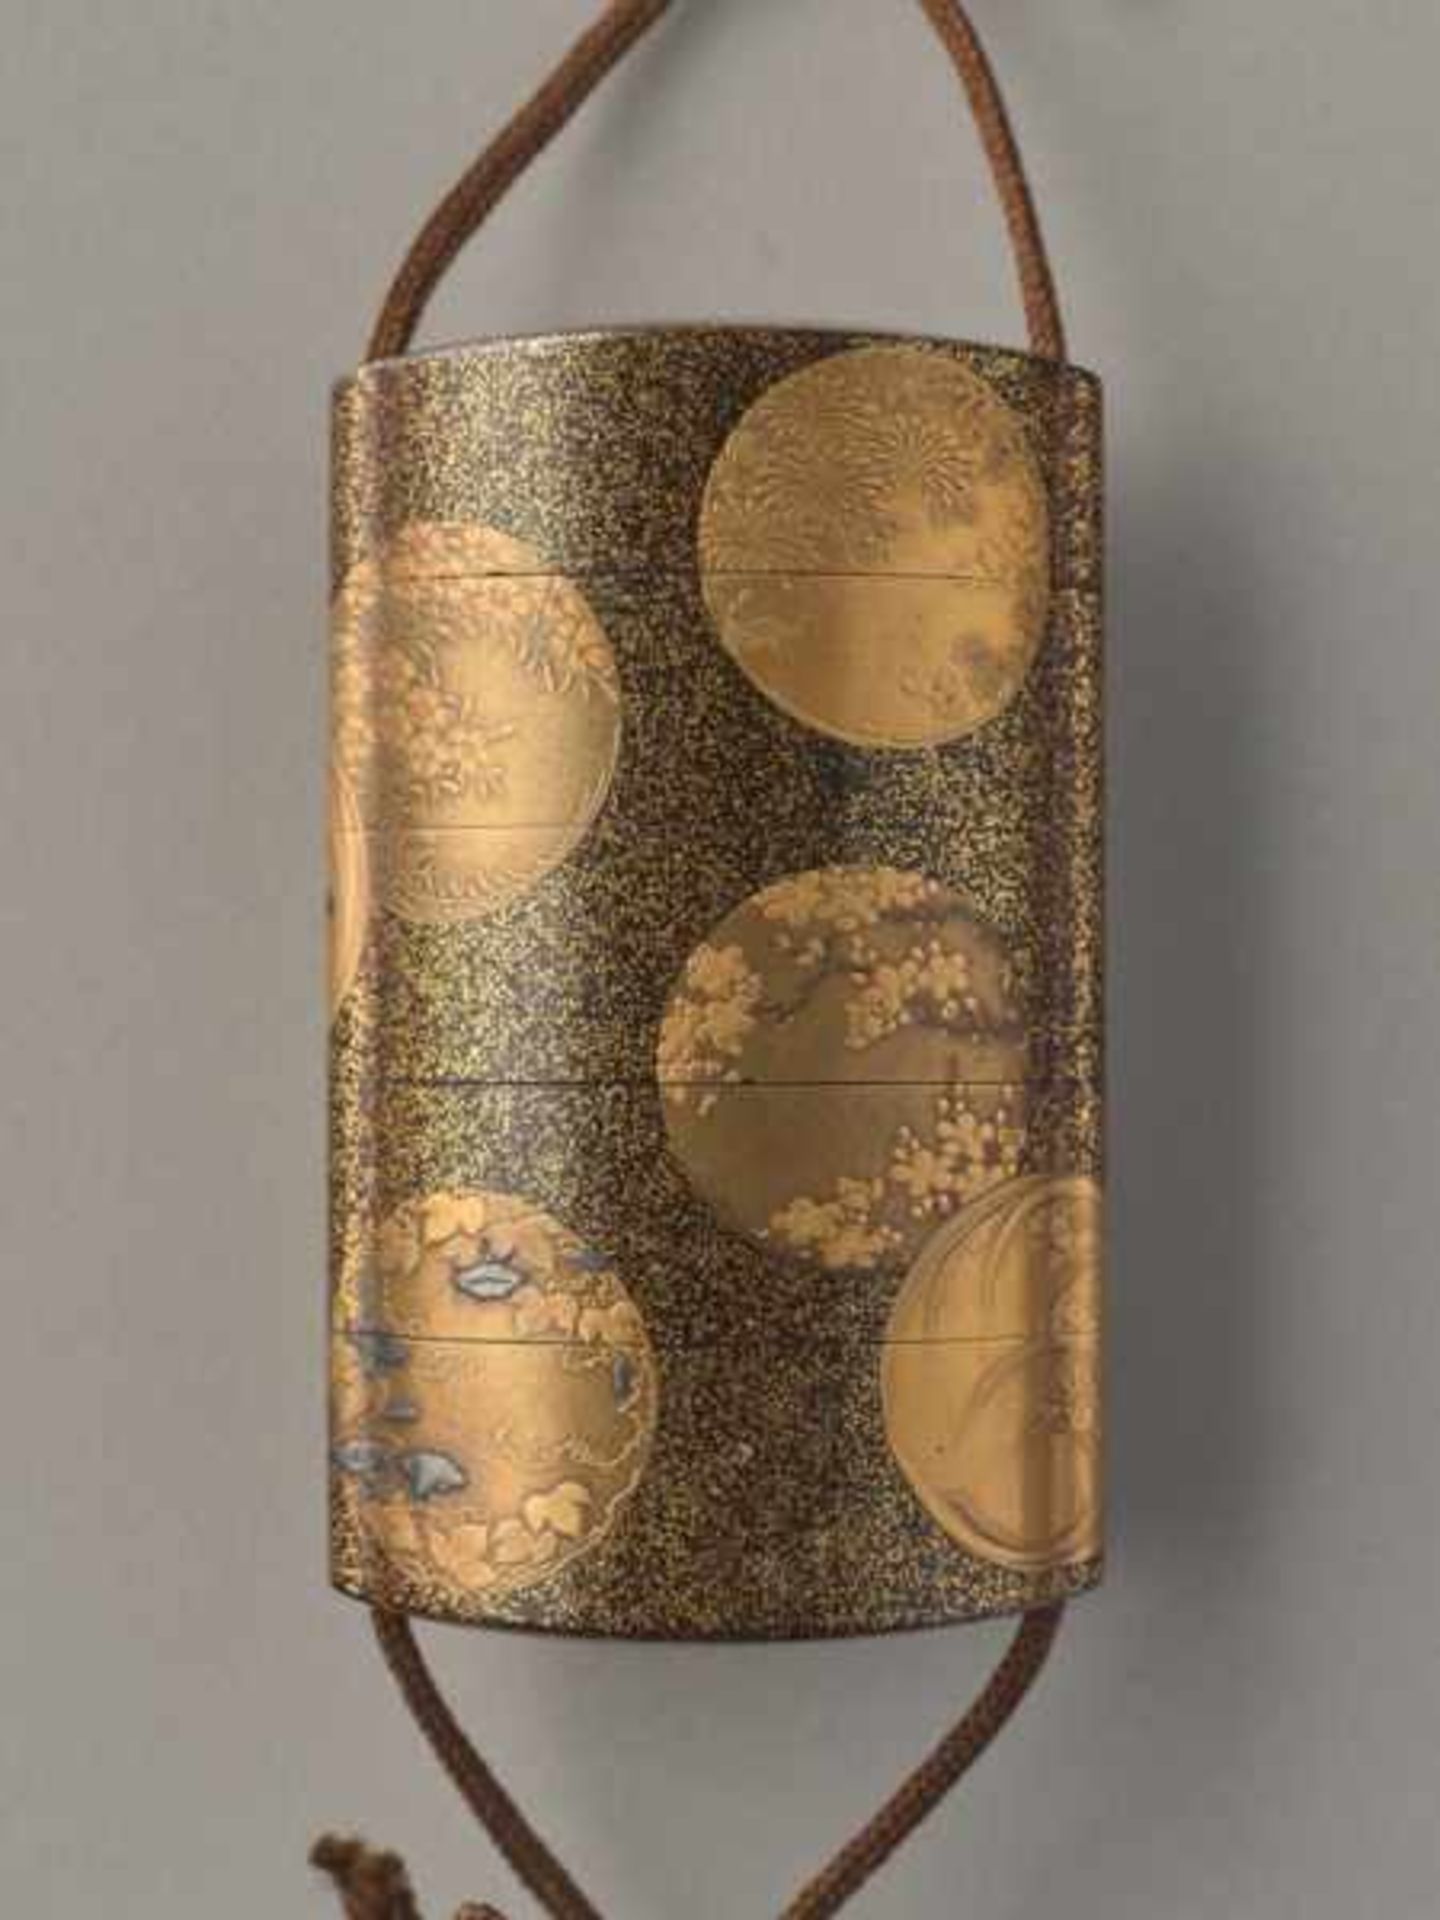 A FOUR CASE LACQUER AND GOLD INRO BY CHOKOKUSEN OF BLO SSOMS Lacquer, gold and silver inro. Japan, - Image 2 of 5